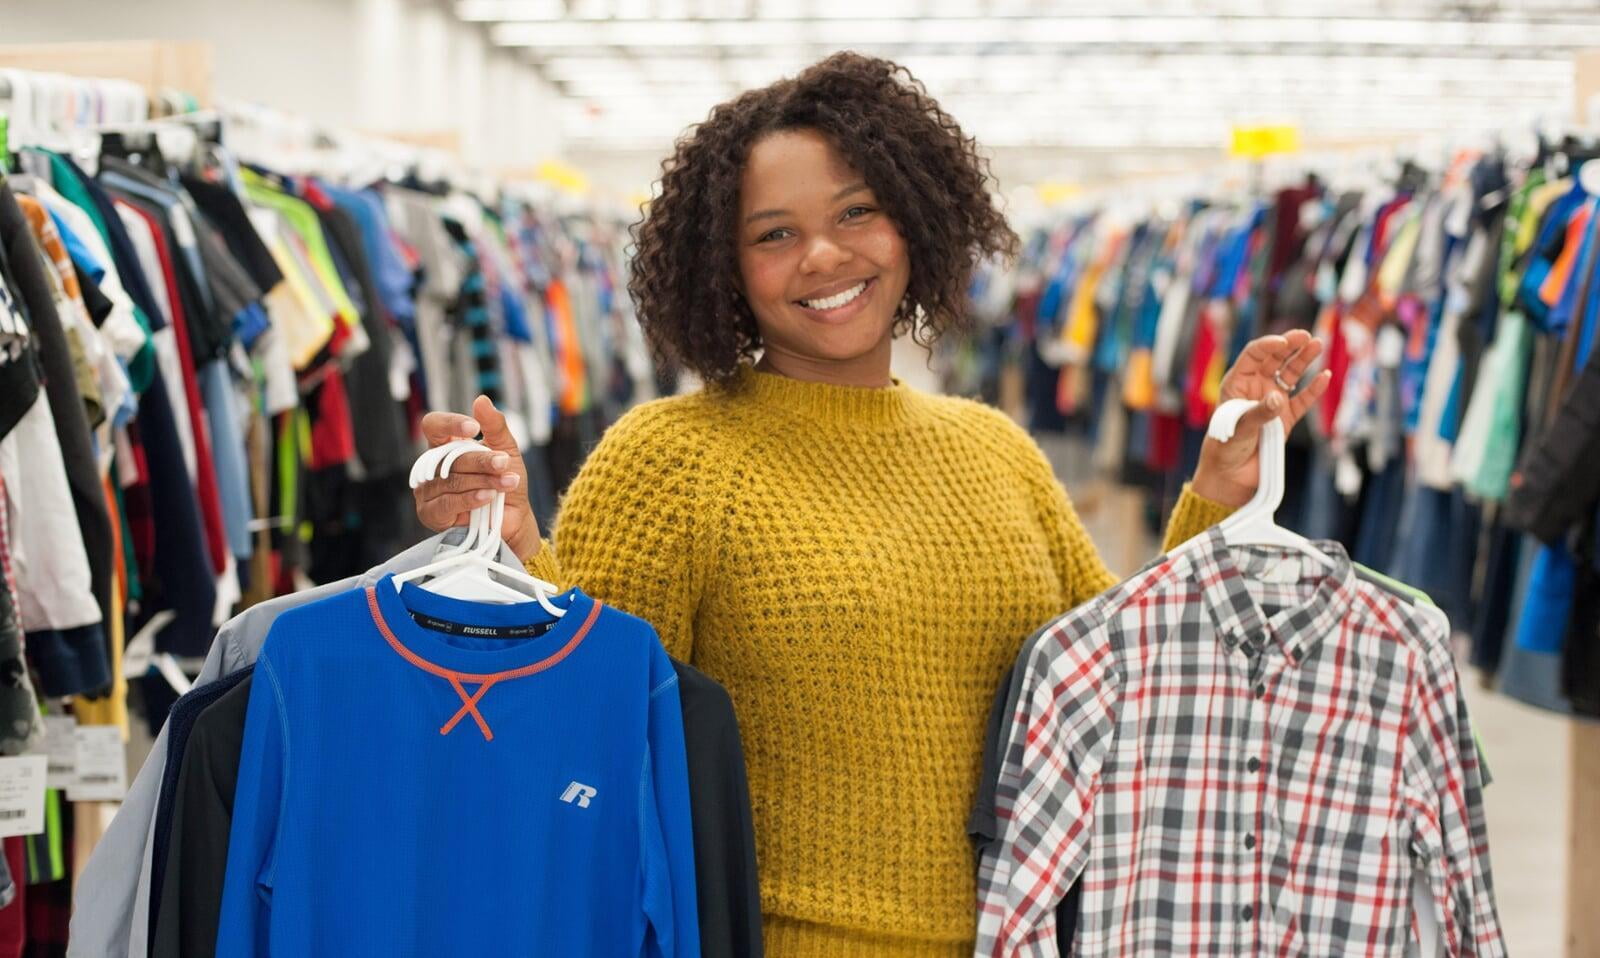 Smiling woman in a gold sweater is shopping and holding up clothing on hangers in both hands.